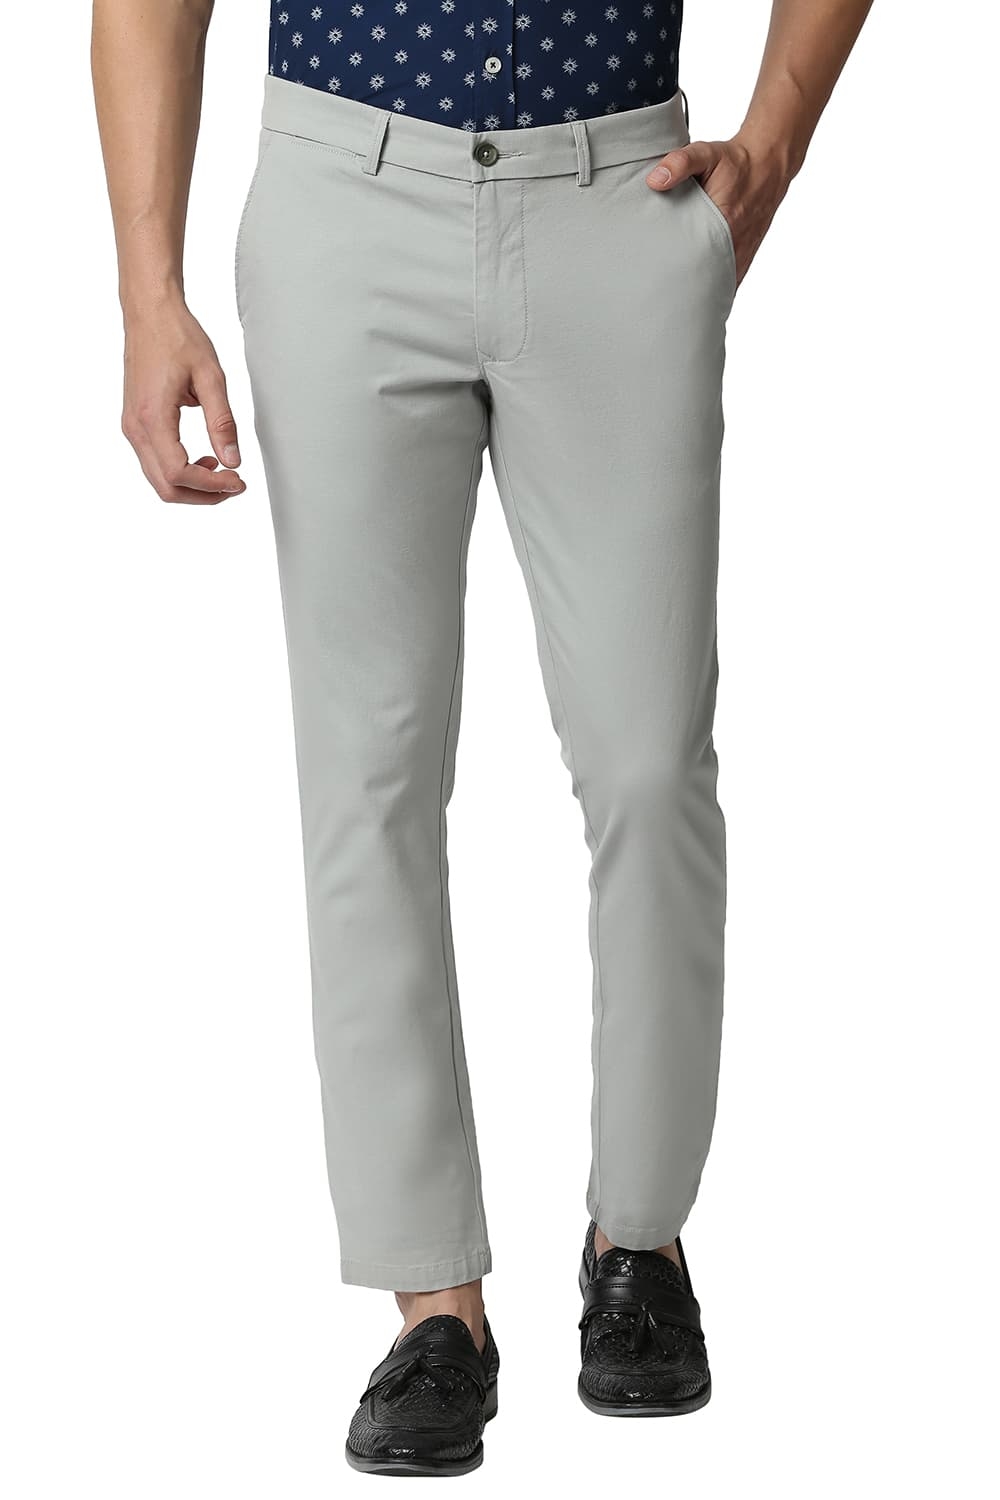 Basics | BASICS CASUAL SELF LIGHT GREEN COTTON STRETCH TAPERED TROUSERS 